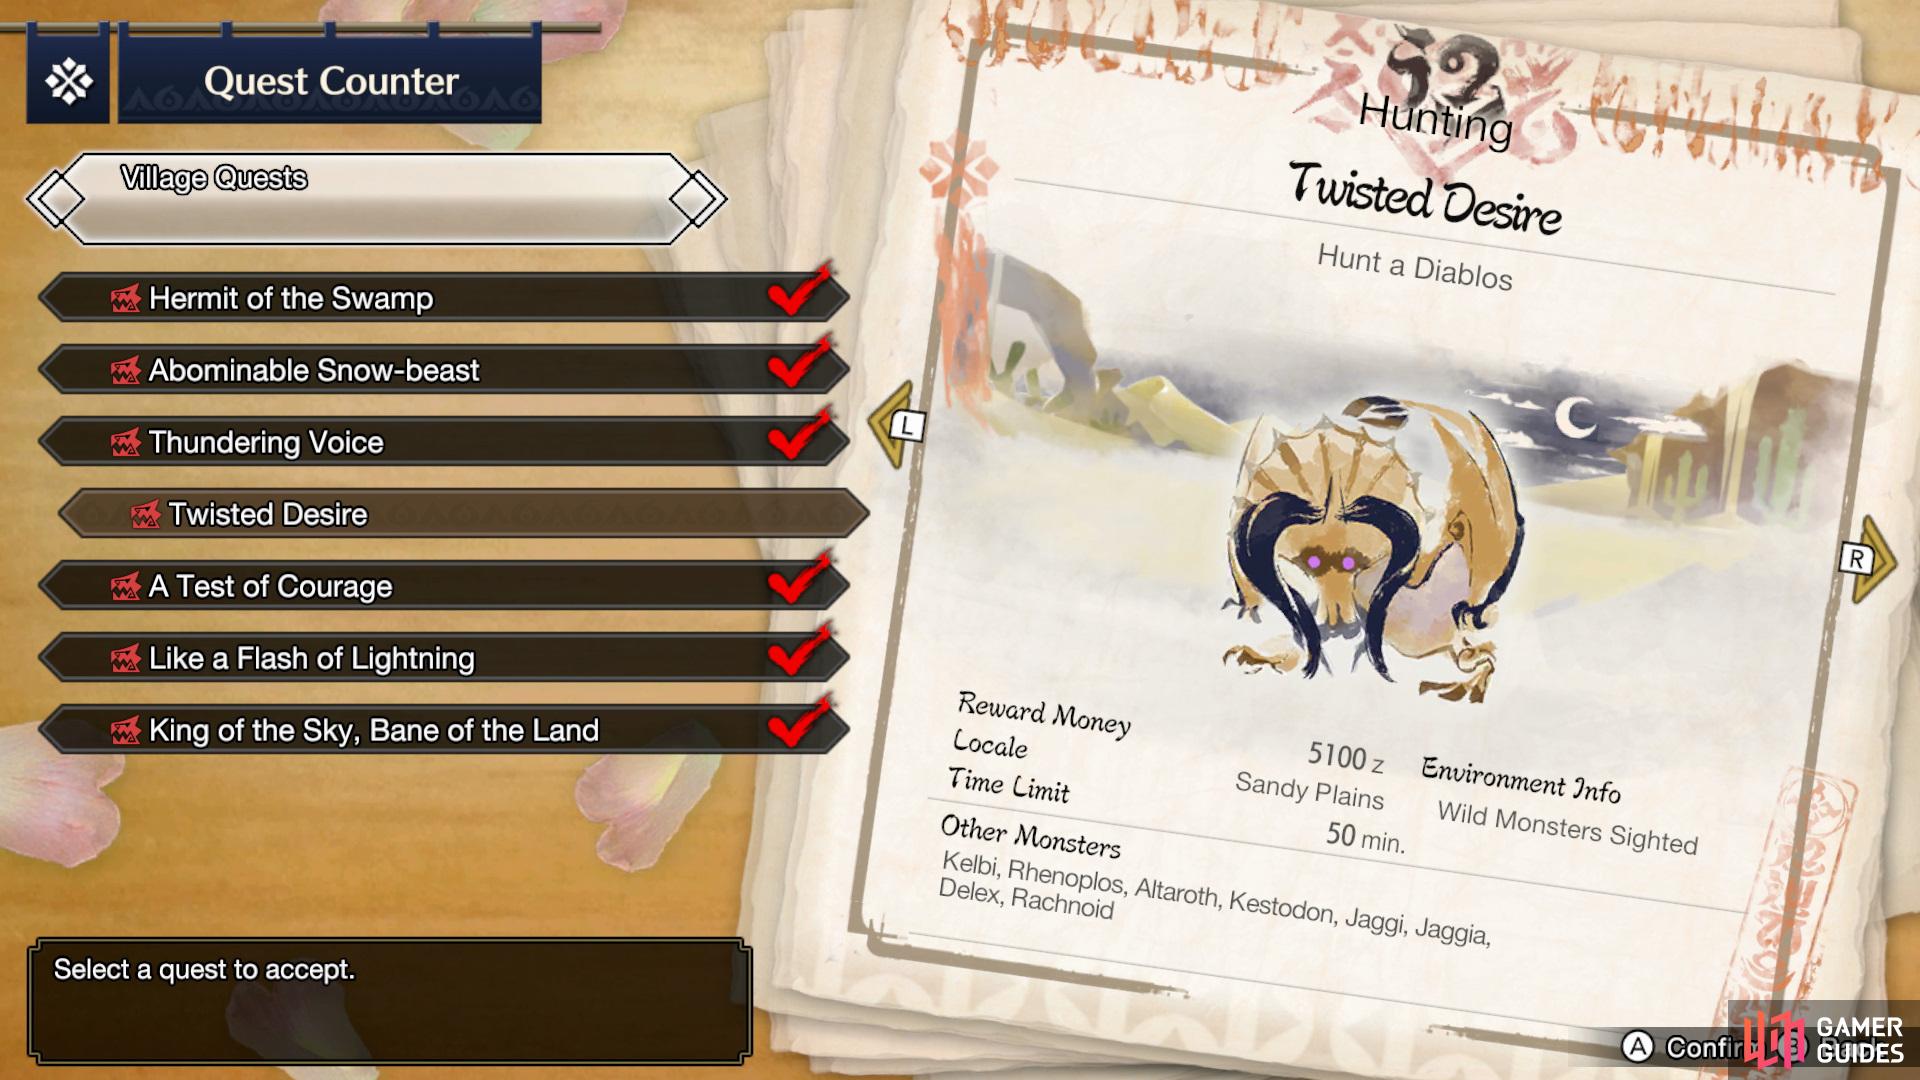 The Twisted Desire Quest becomes available when you reach 6* Village Quests.